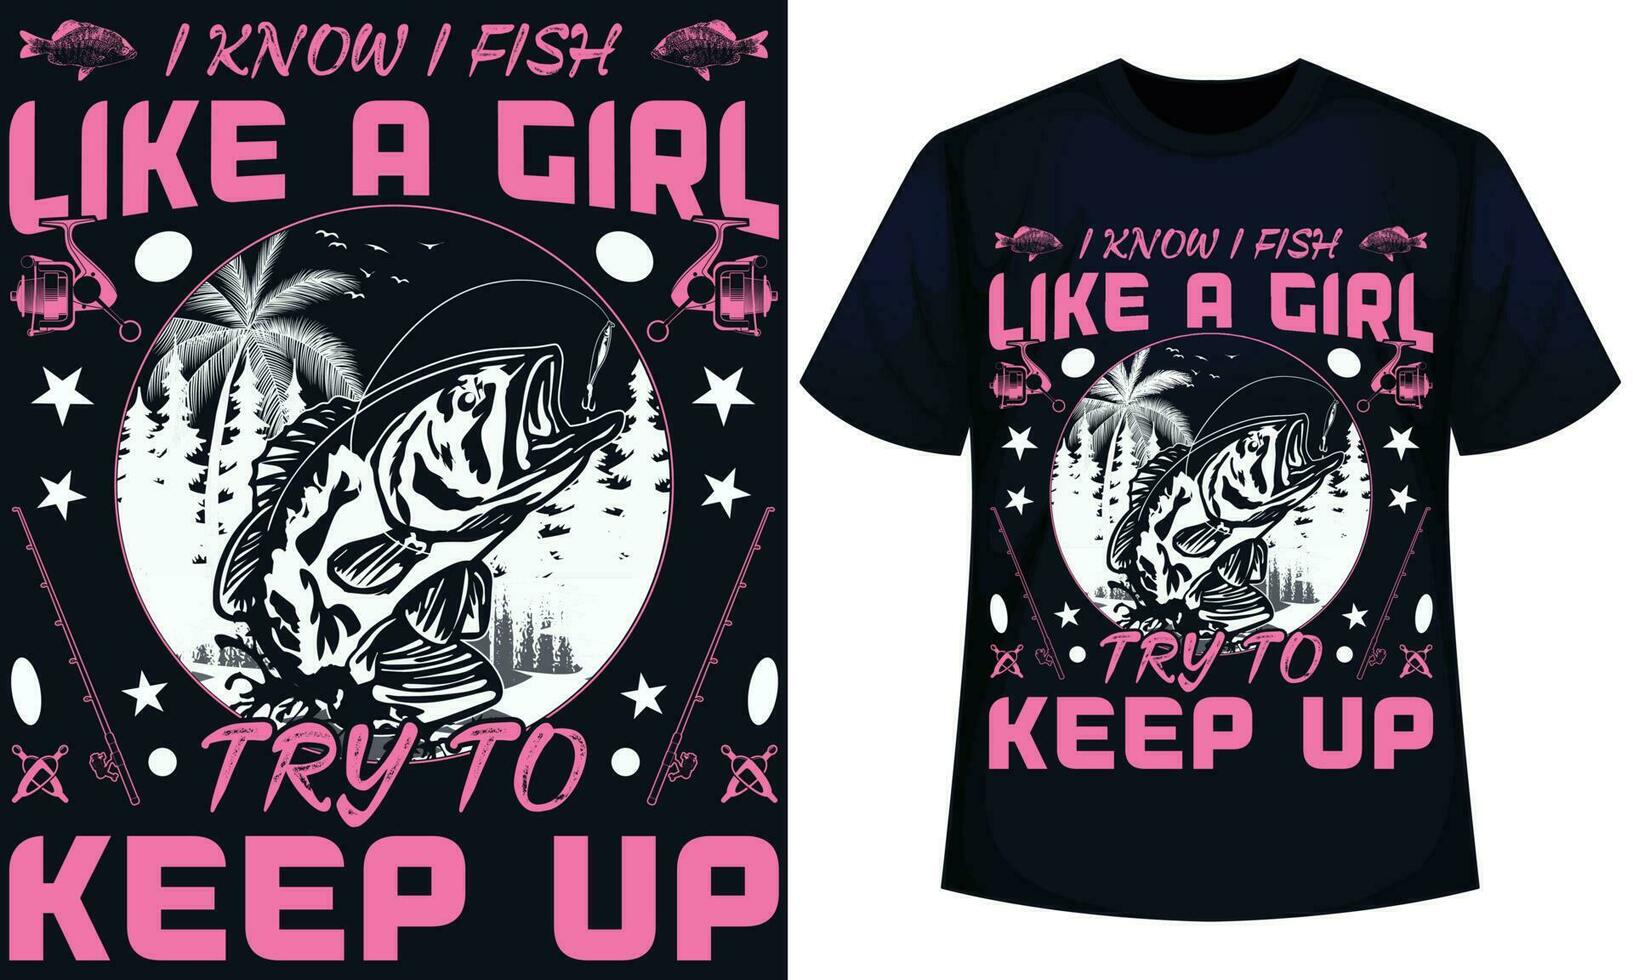 I KNOW I FISH LIKE A GIRL TRY TO KEEP UP, Fishing t shirt design vector